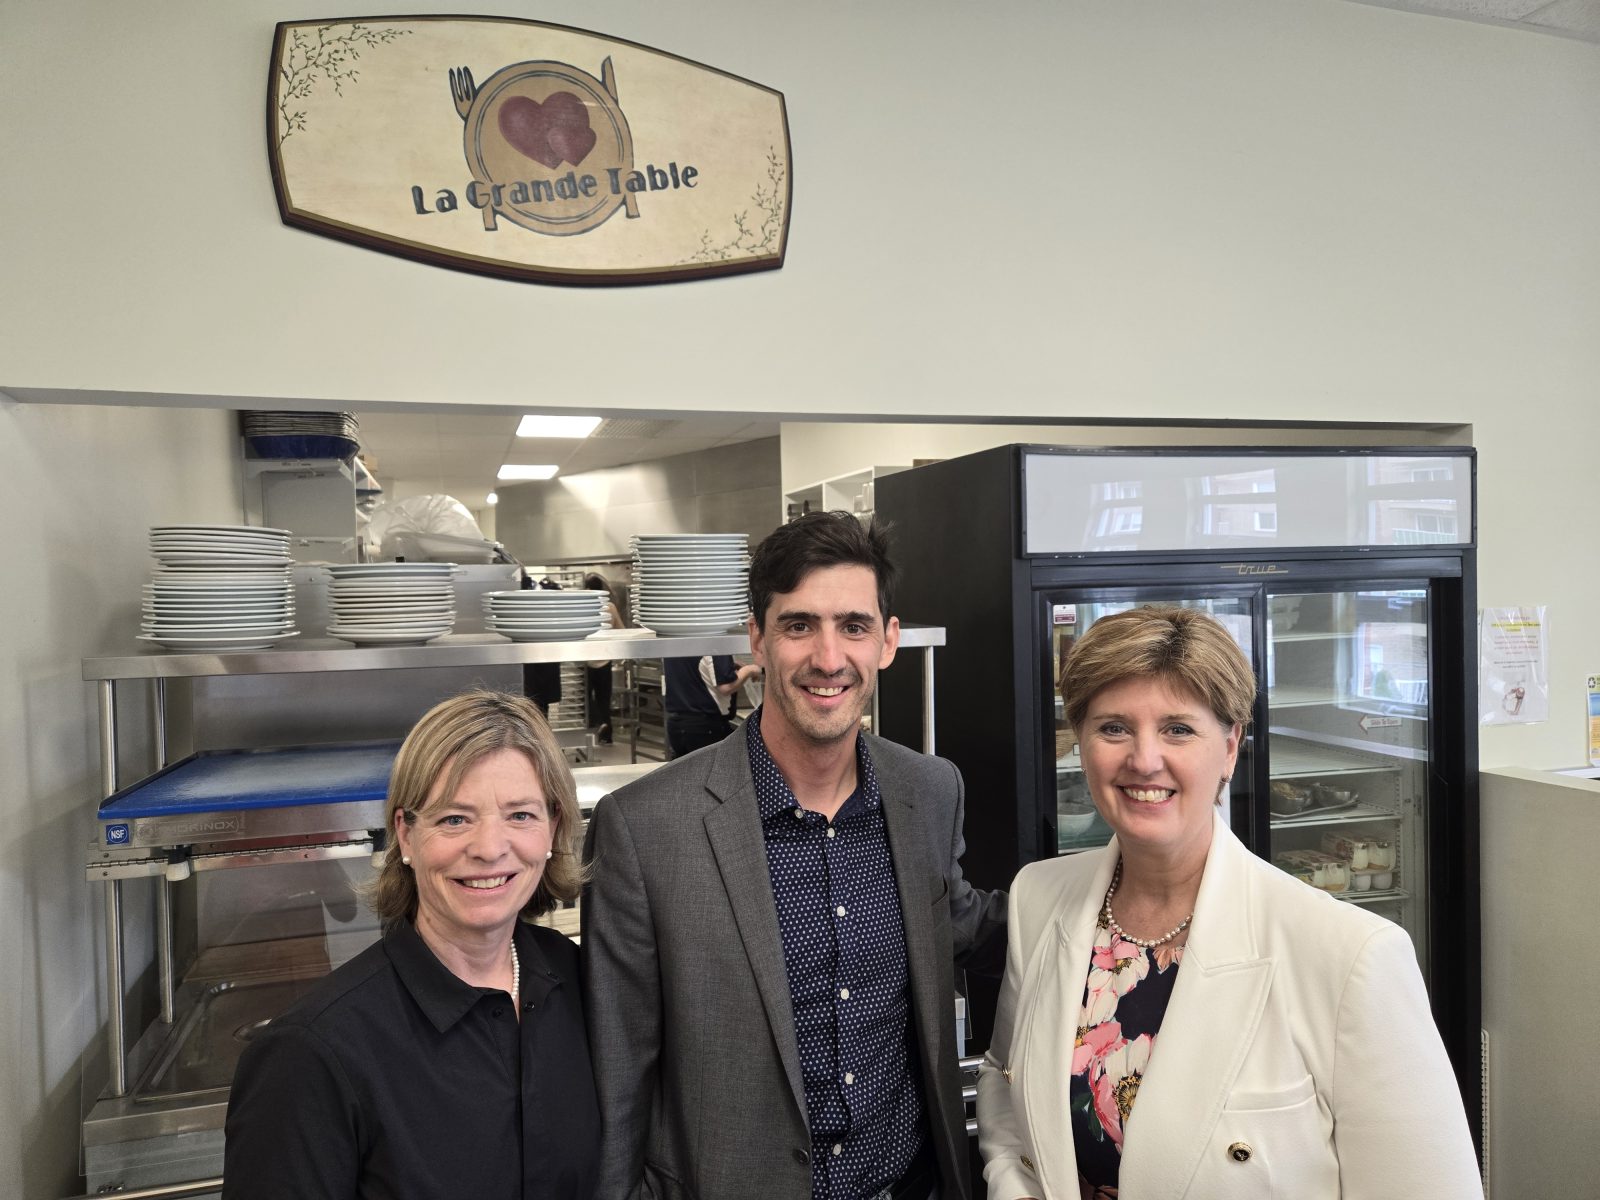 New federal School Meal Program will help Sherbrooke, says local food charity director